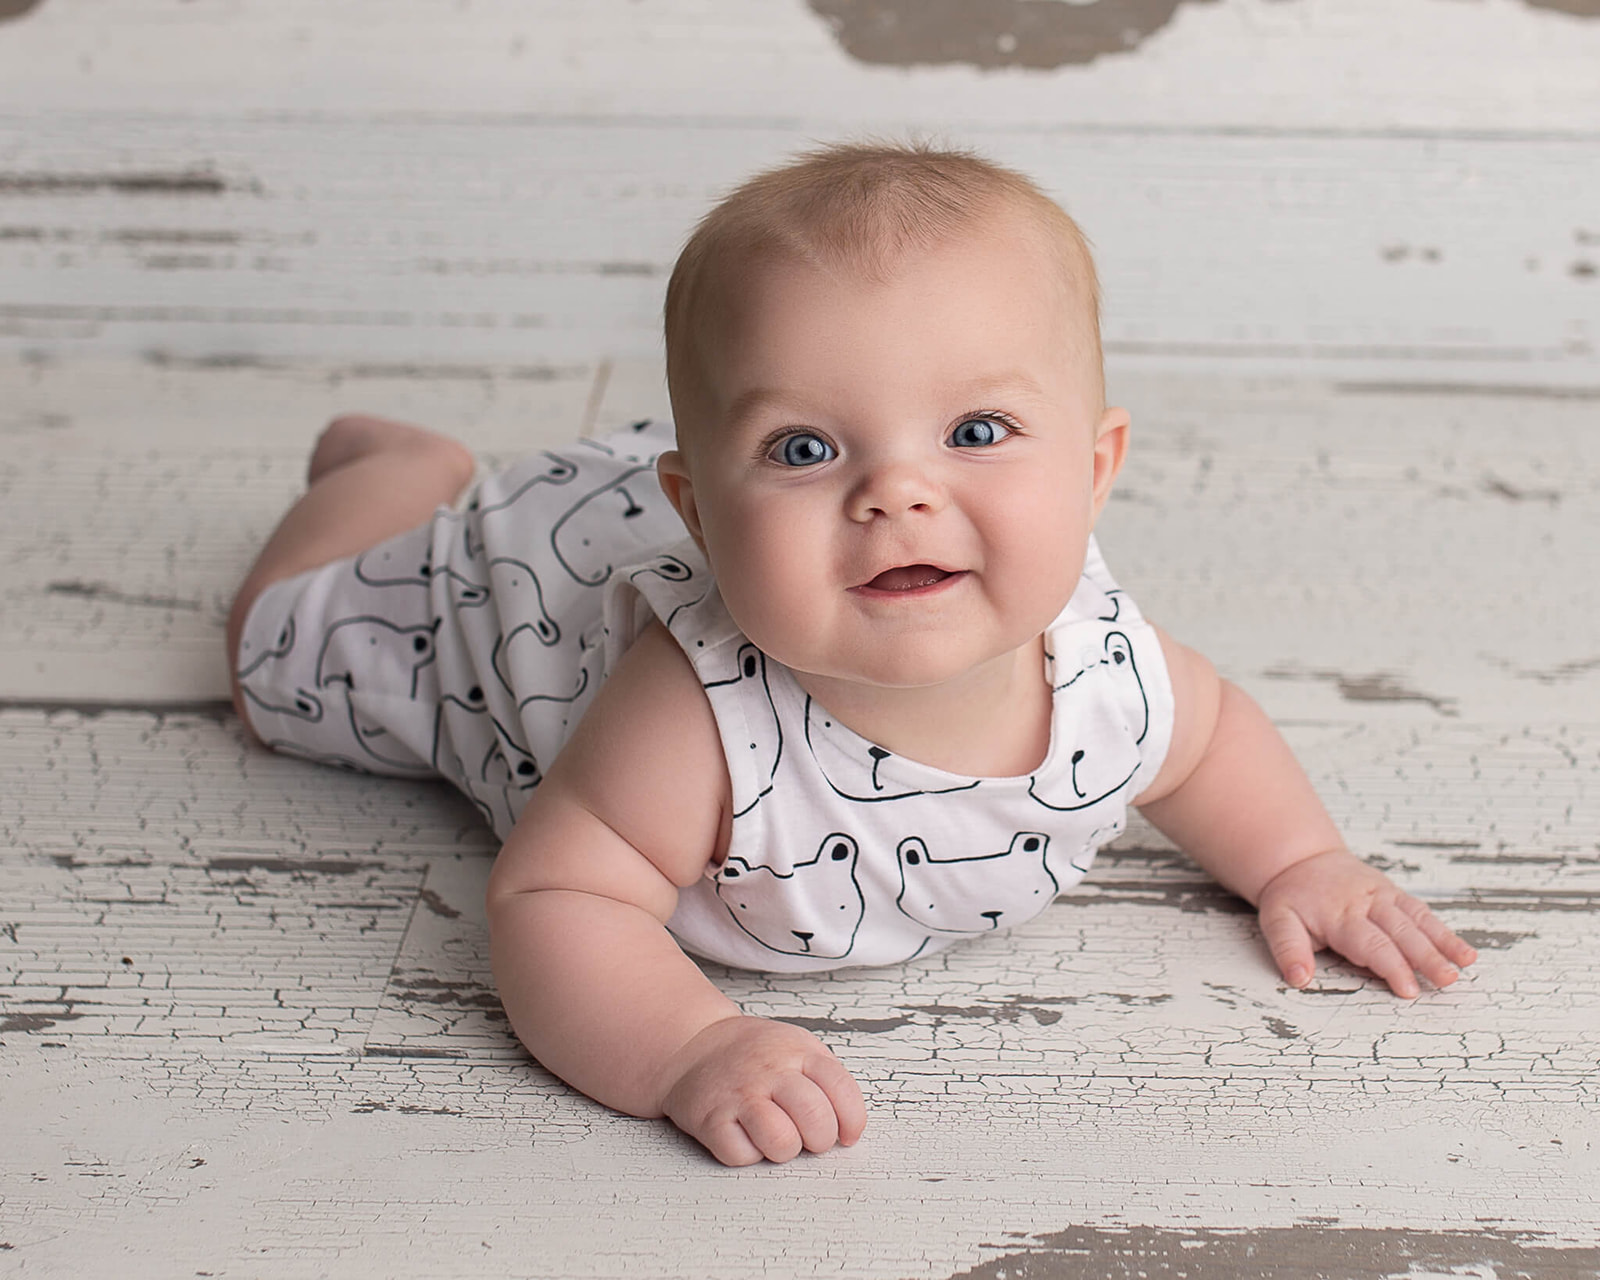 6 month old smiling on belly during newborn session for introducing solid foods to your baby